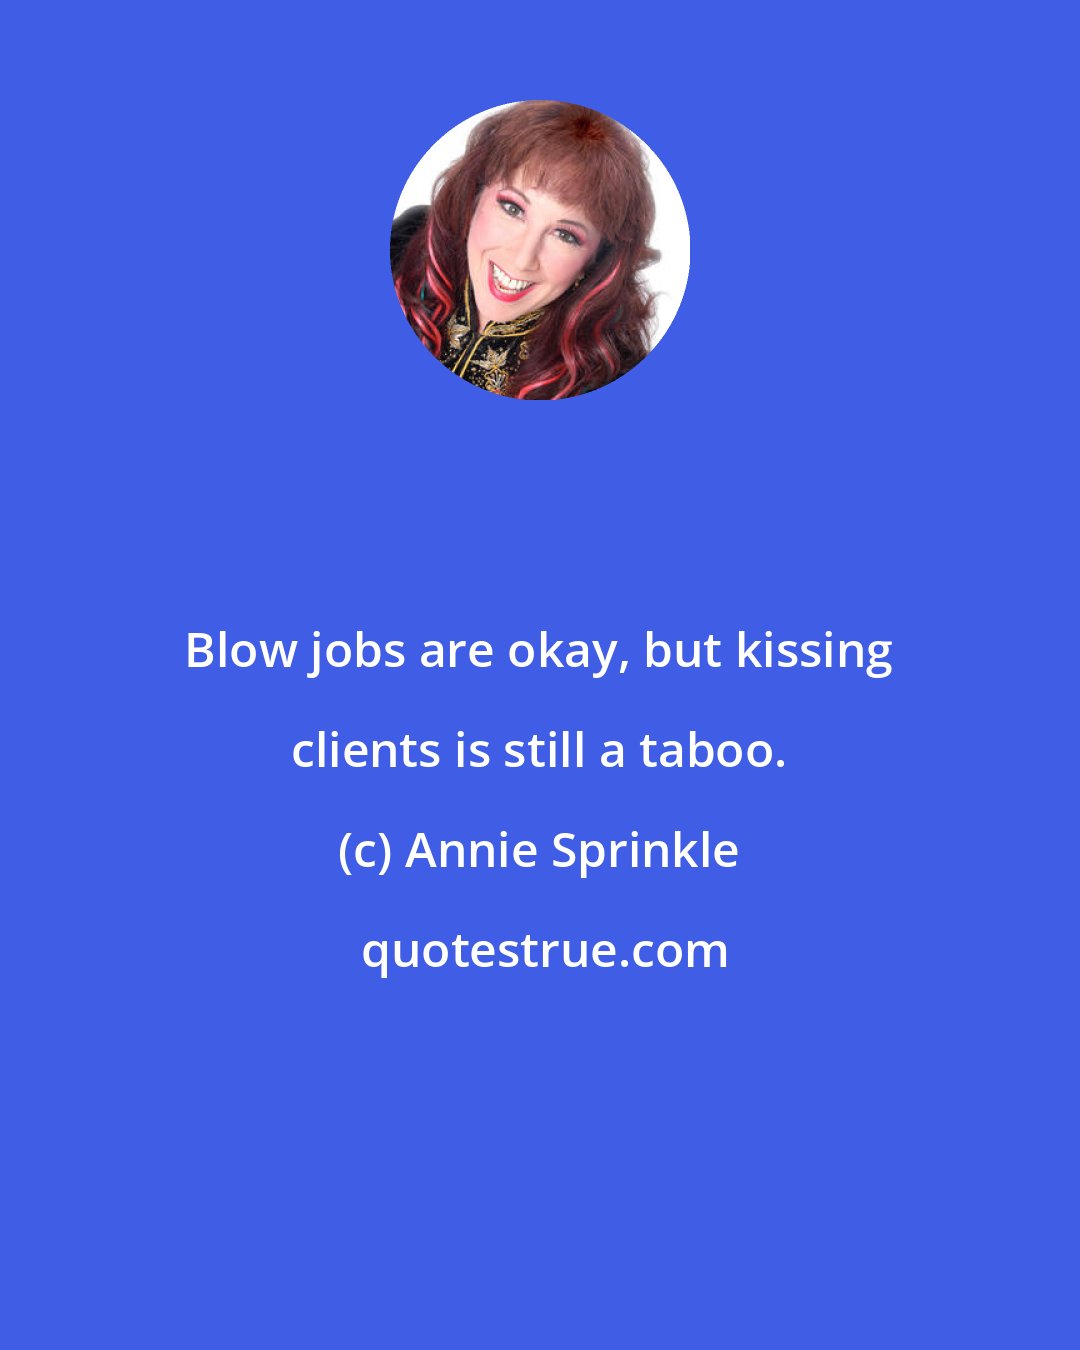 Annie Sprinkle: Blow jobs are okay, but kissing clients is still a taboo.